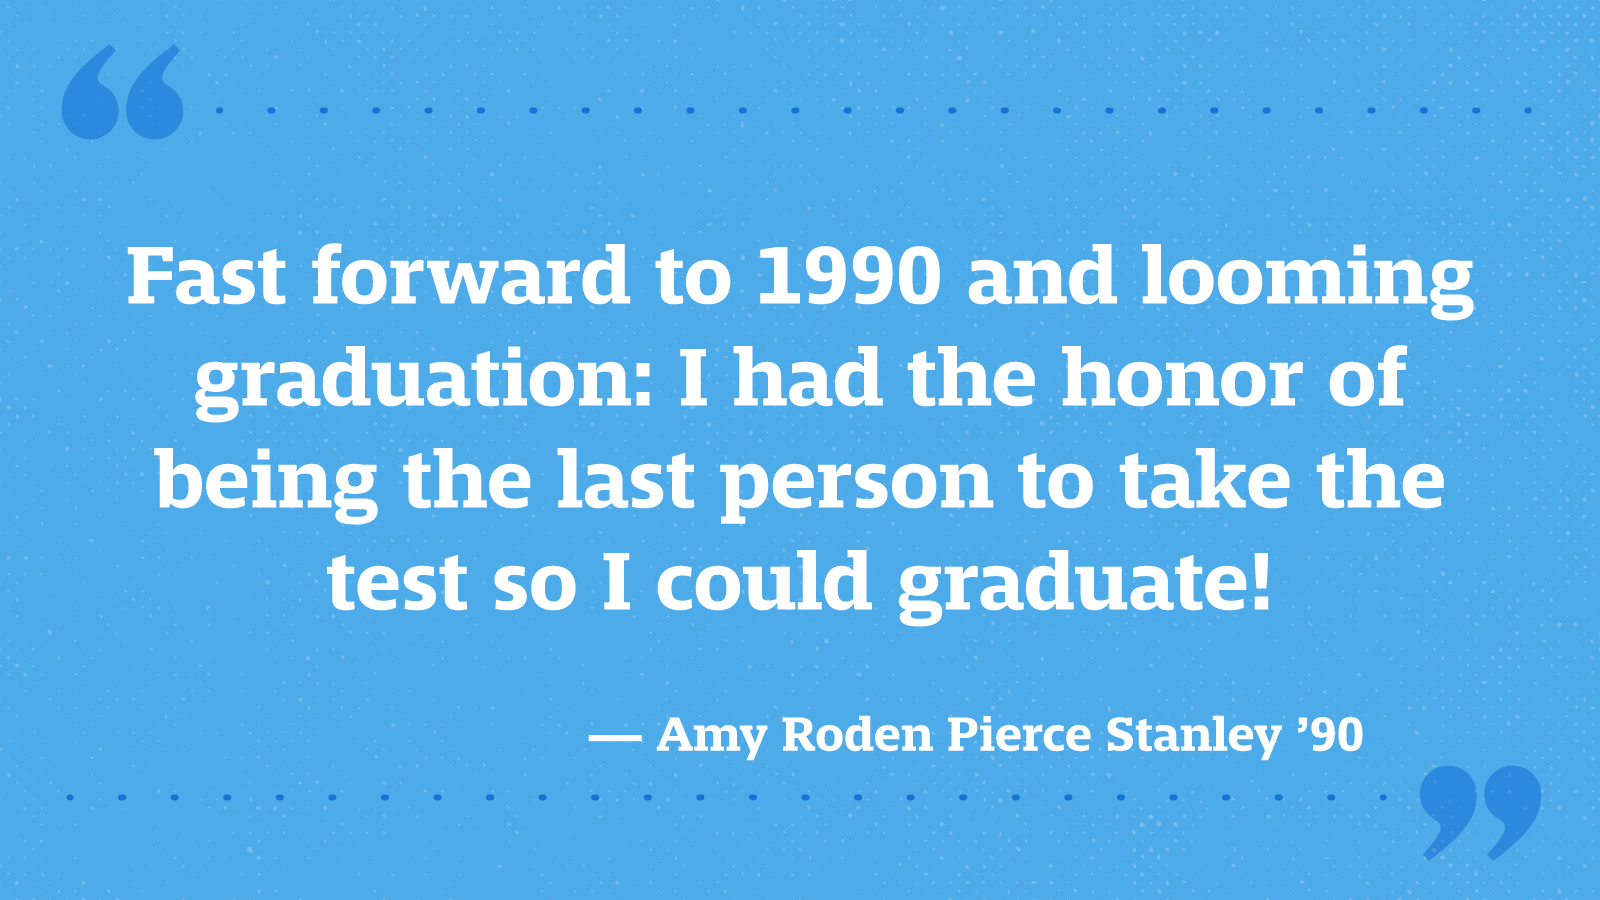 Fast forward to 1990 and looming graduation: I had the honor of being the last person to take the test so I could graduate! — Amy Roden Pierce Stanley ’90